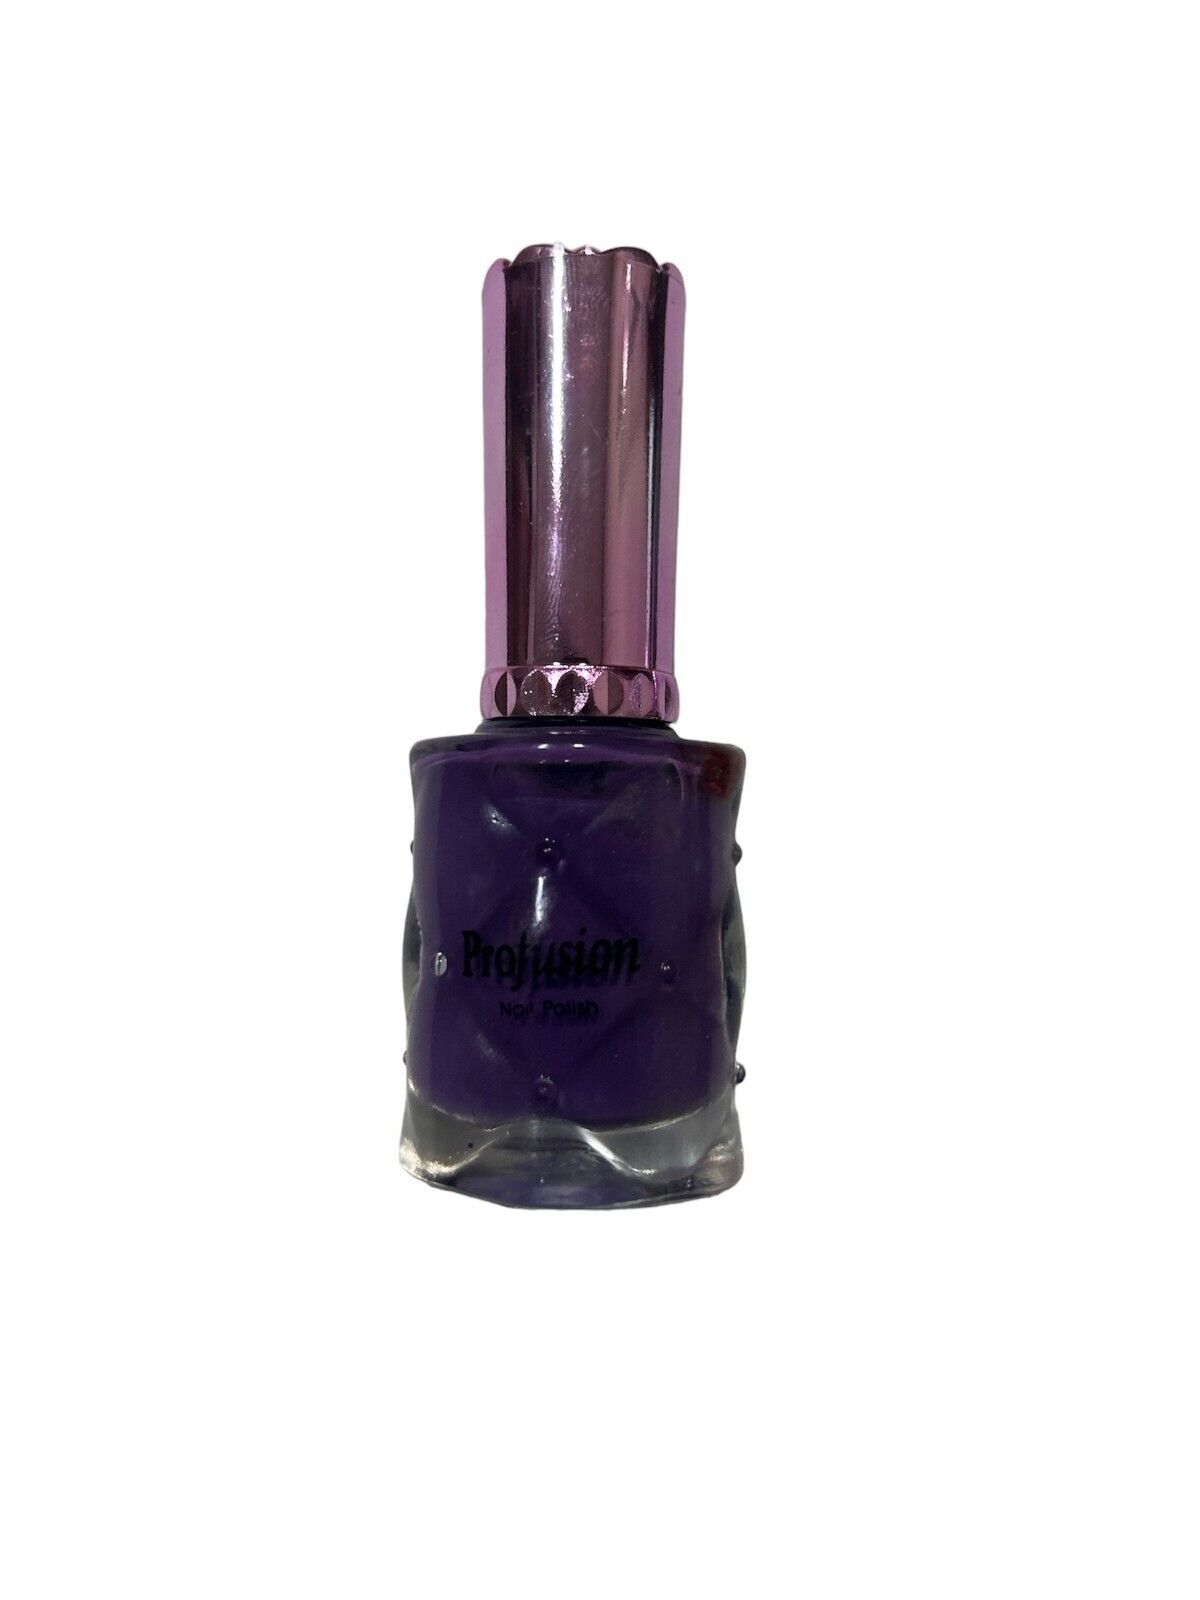 Primary image for ProFusion Nail Polish - Long Lasting - Fast Drying - *PURPLE*